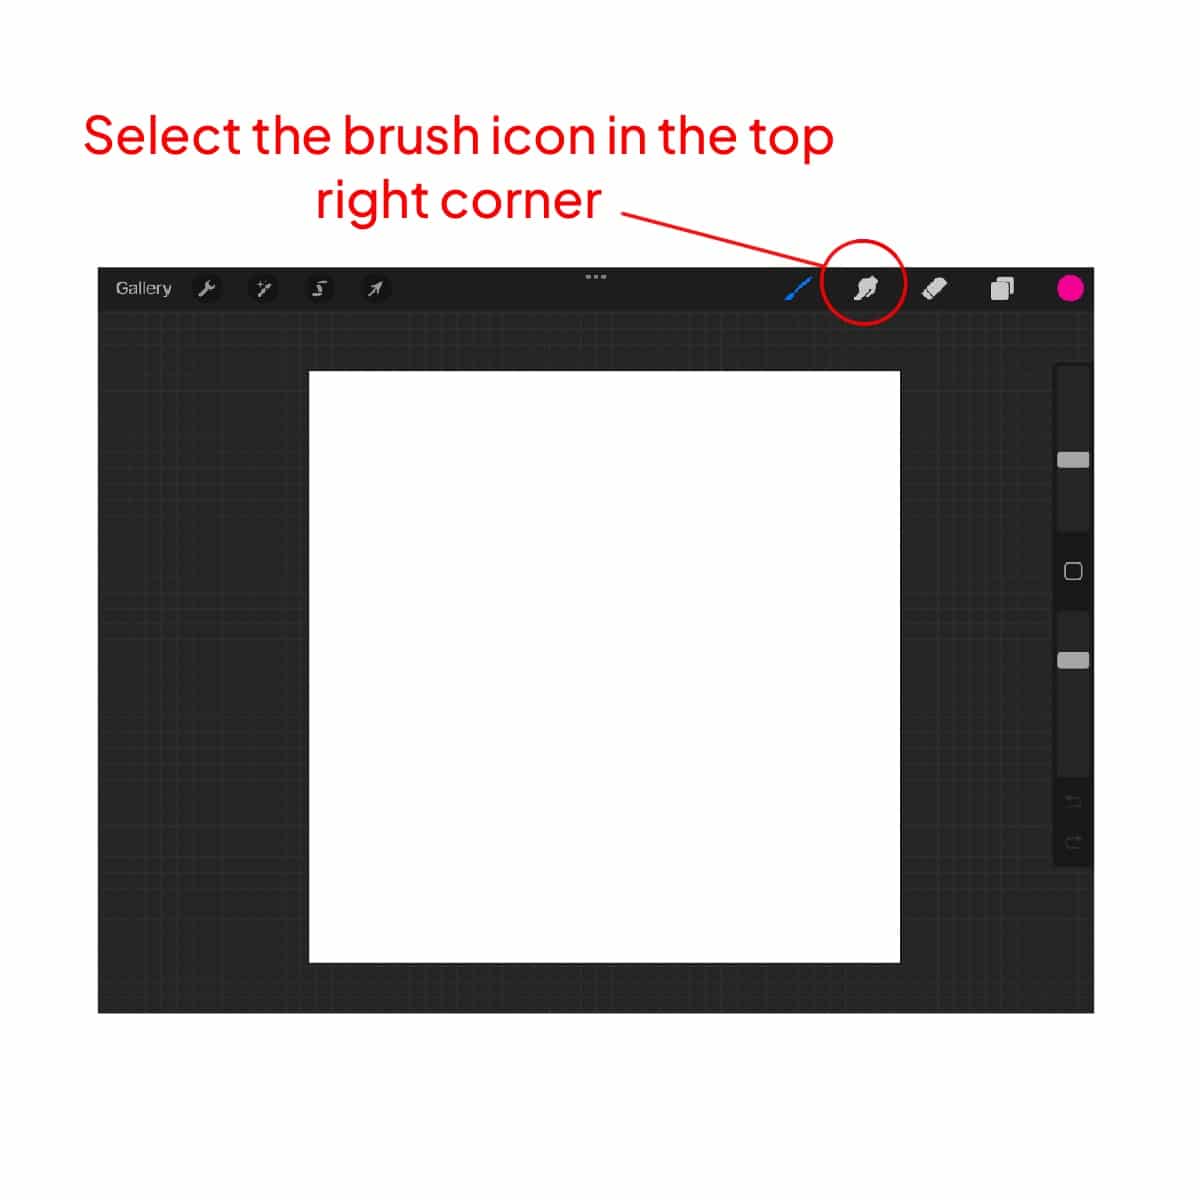 Selecting the brush